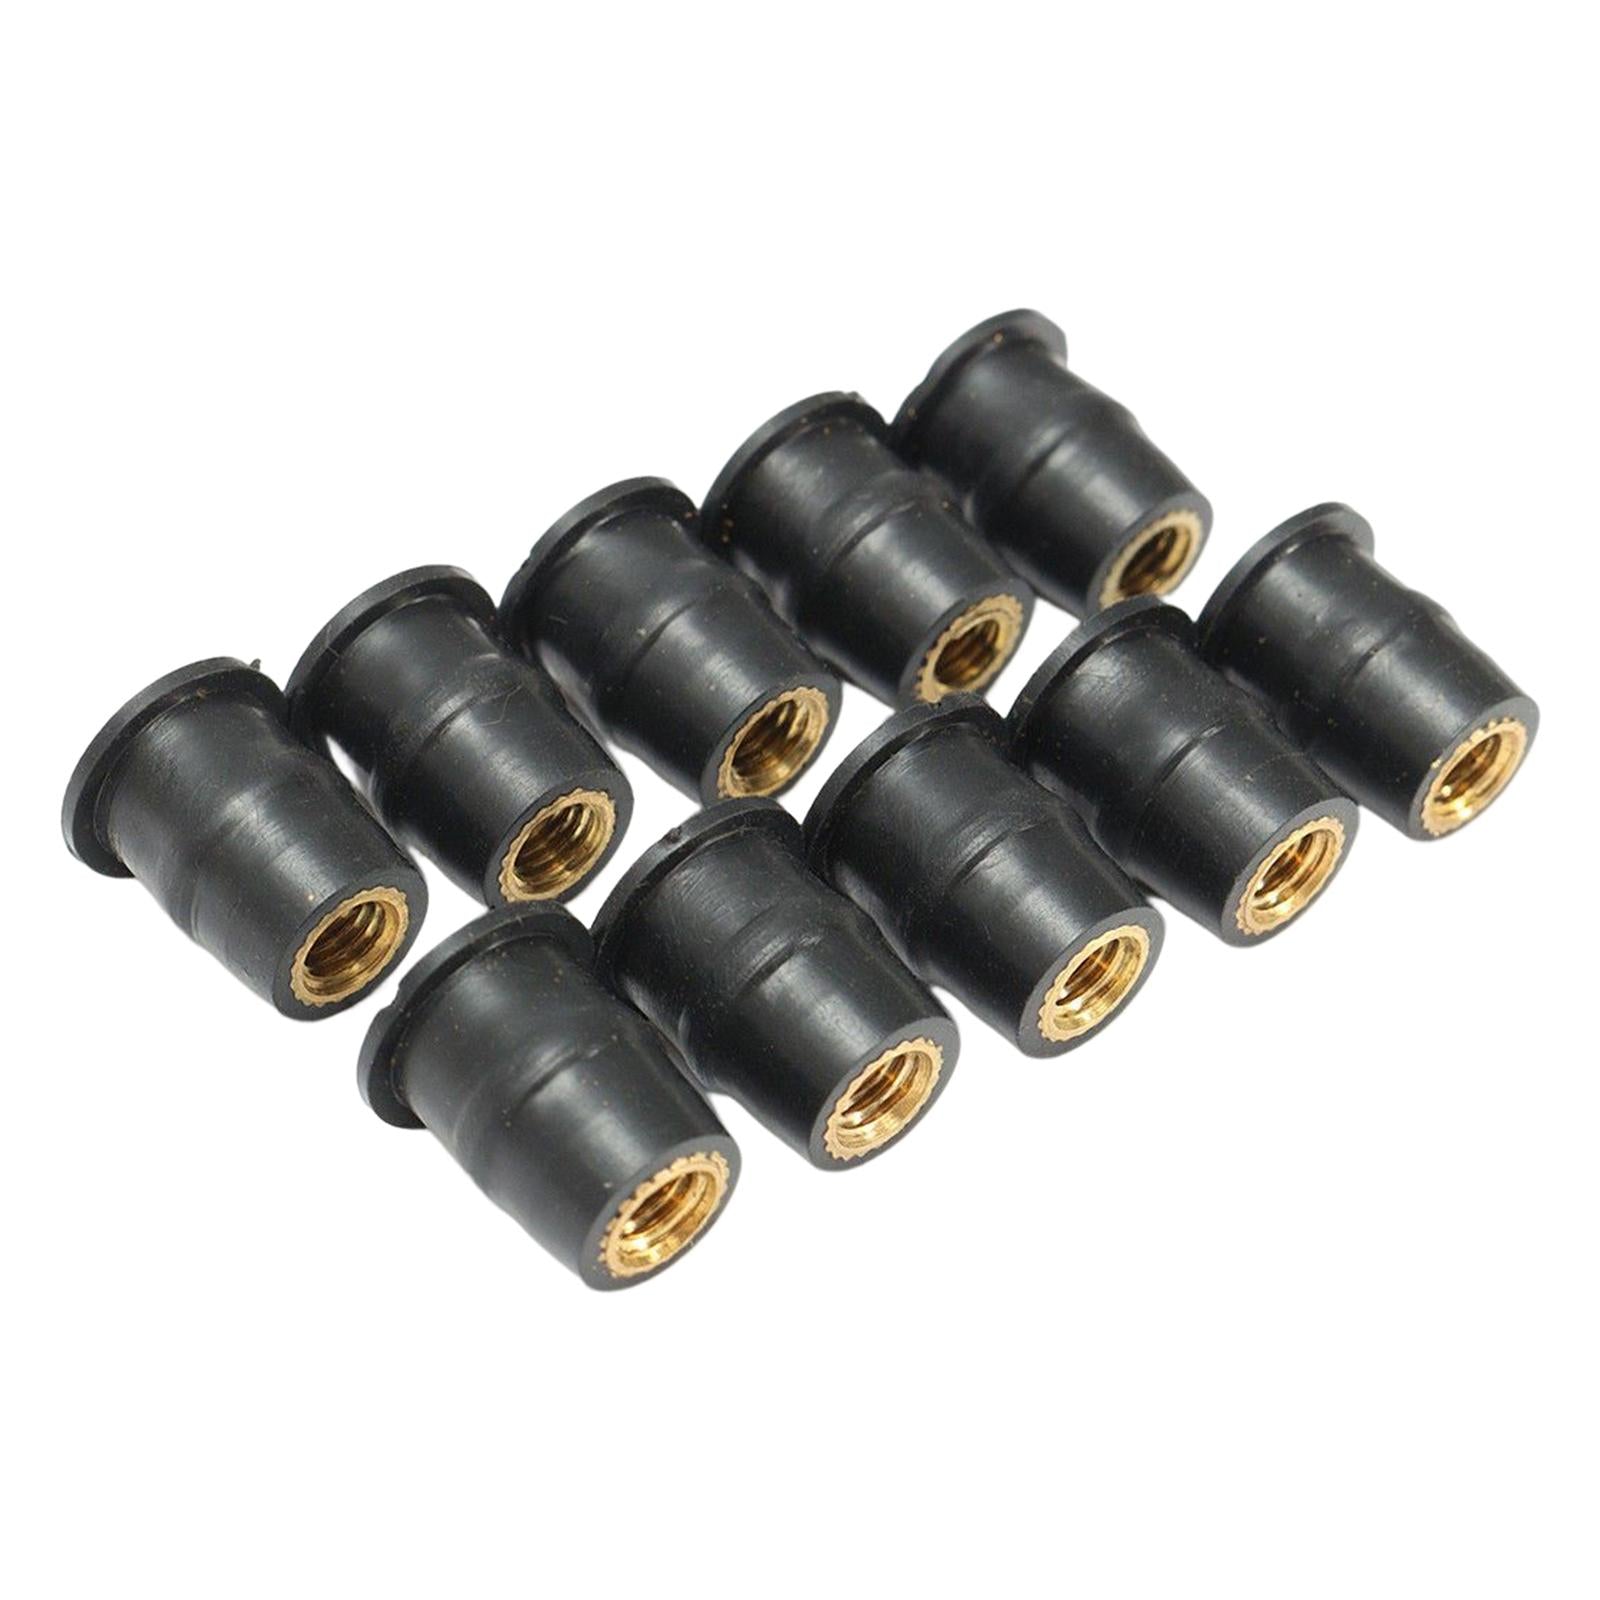 10Pcs M5 Rubber Nuts Windshield Bolts Hardware Replacement for Car